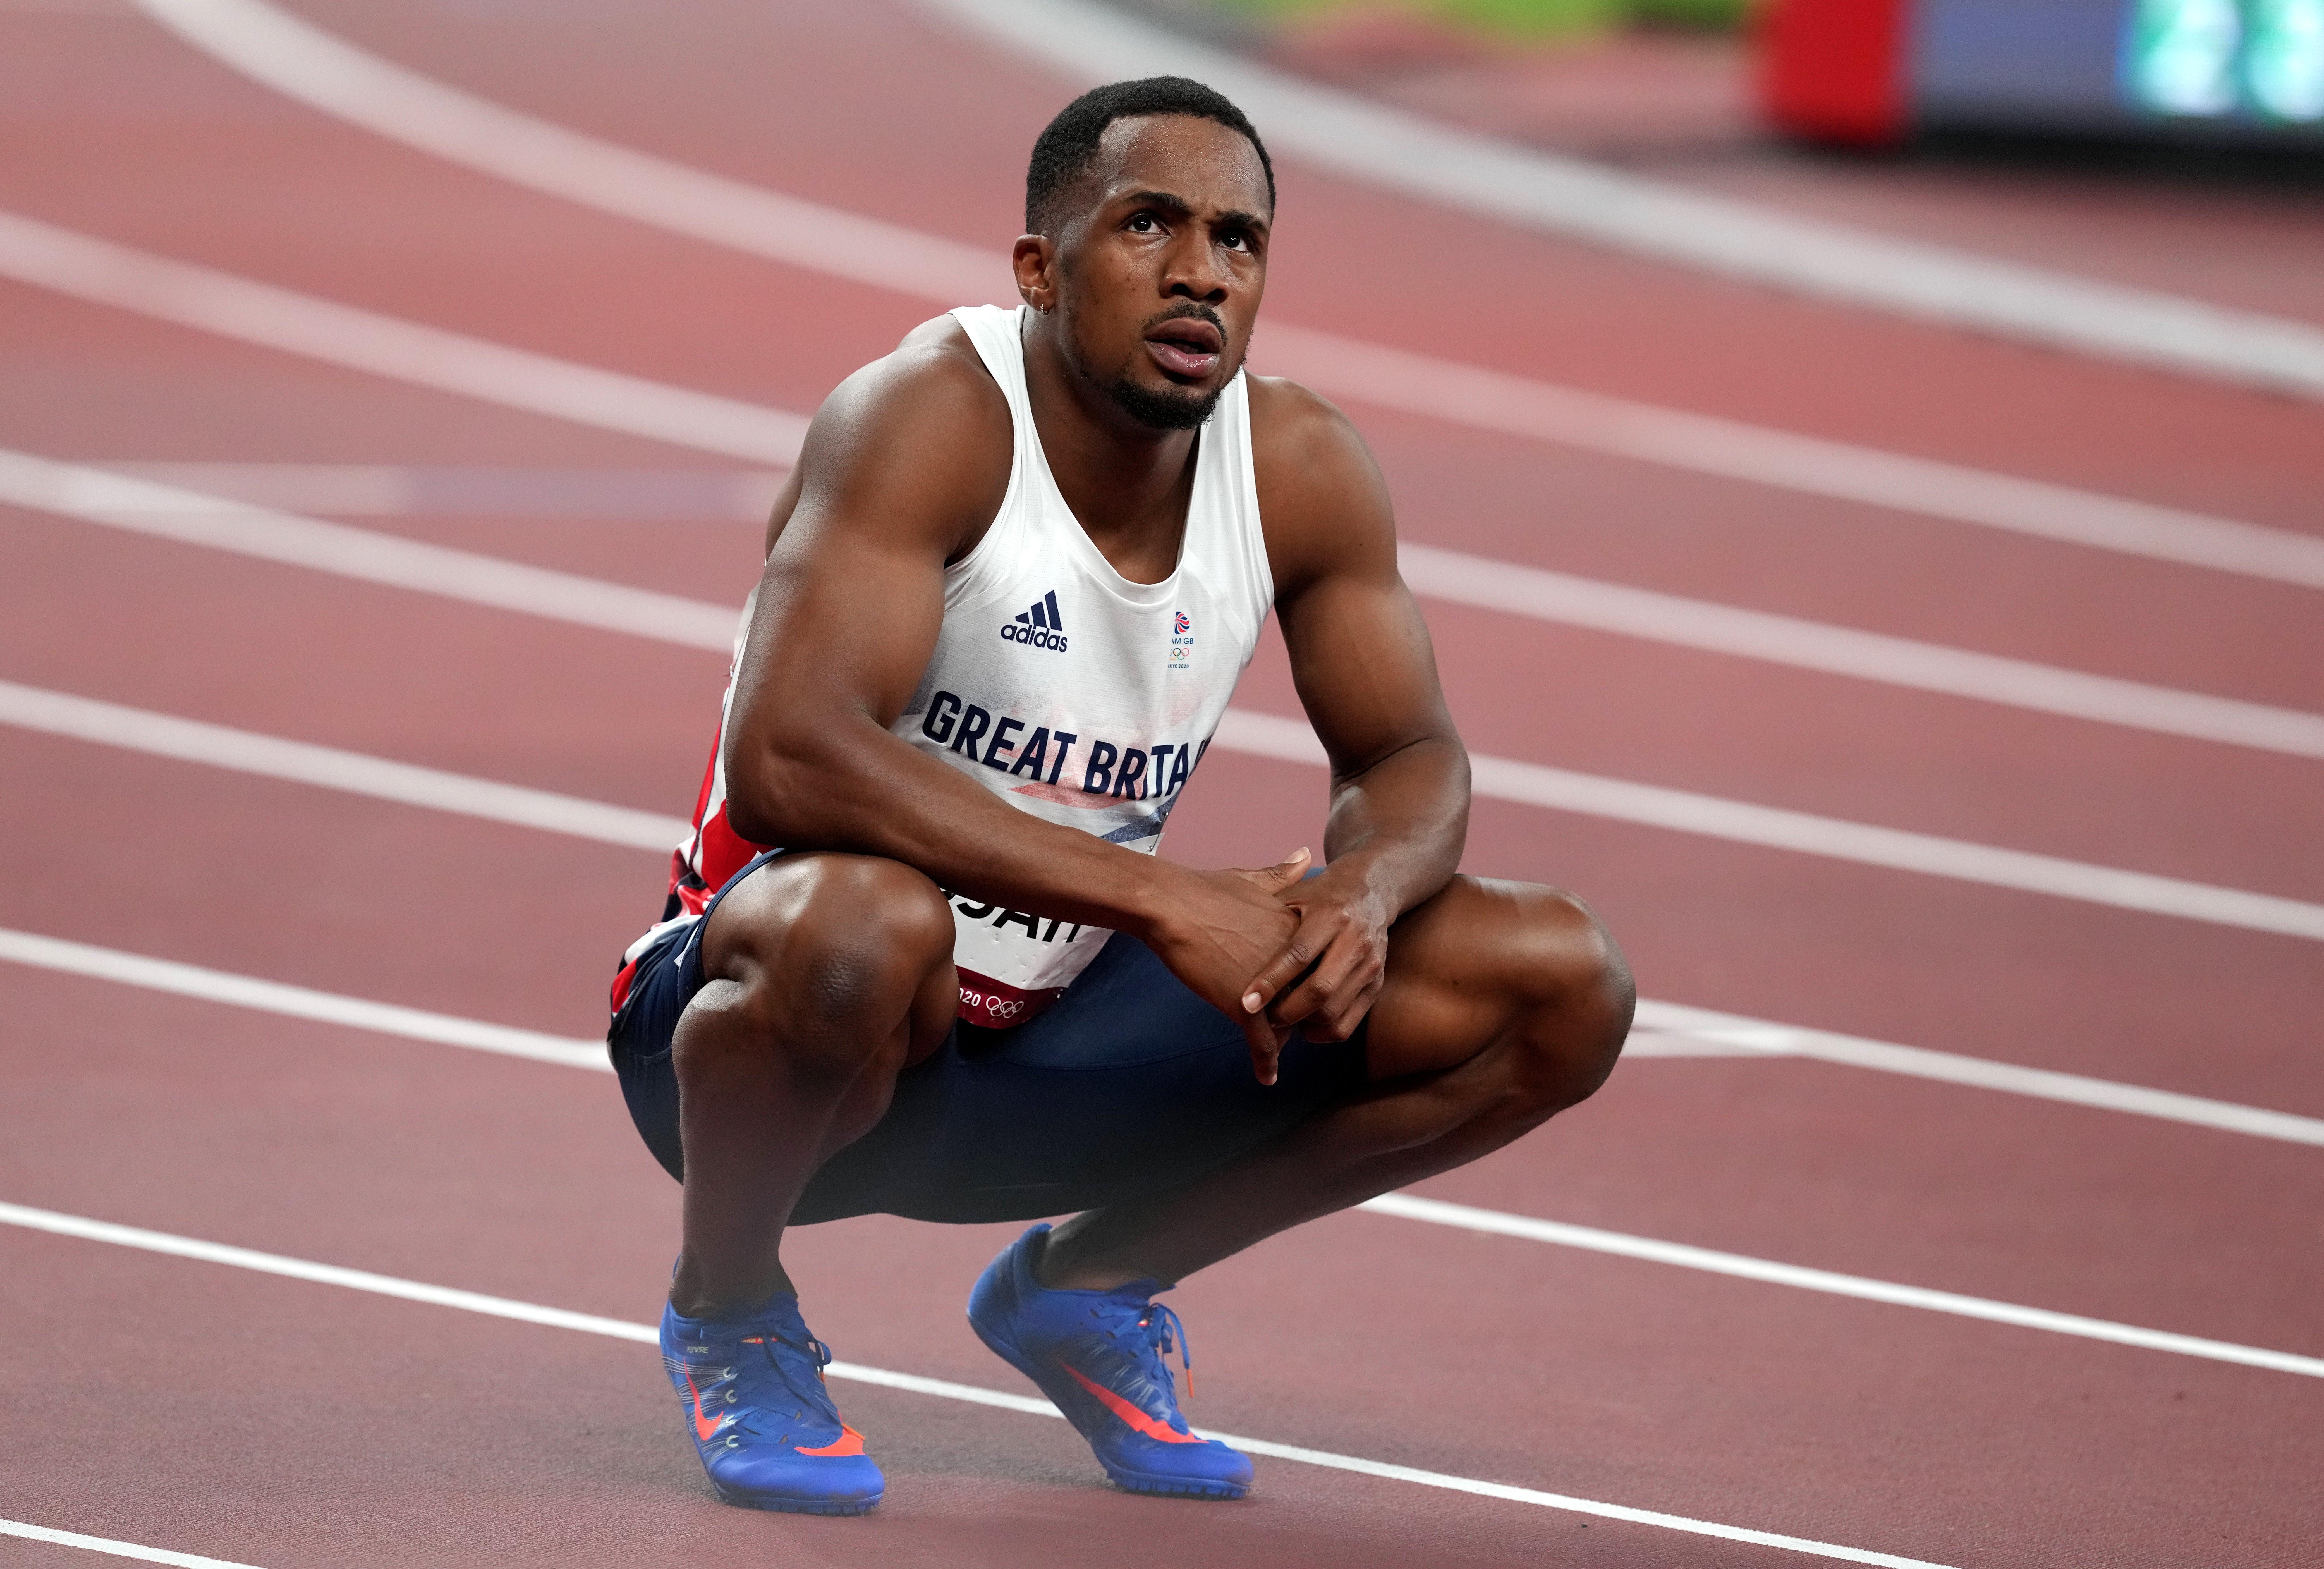 CJ Ujah tested positive for the prohibited substances ostarine and S-23